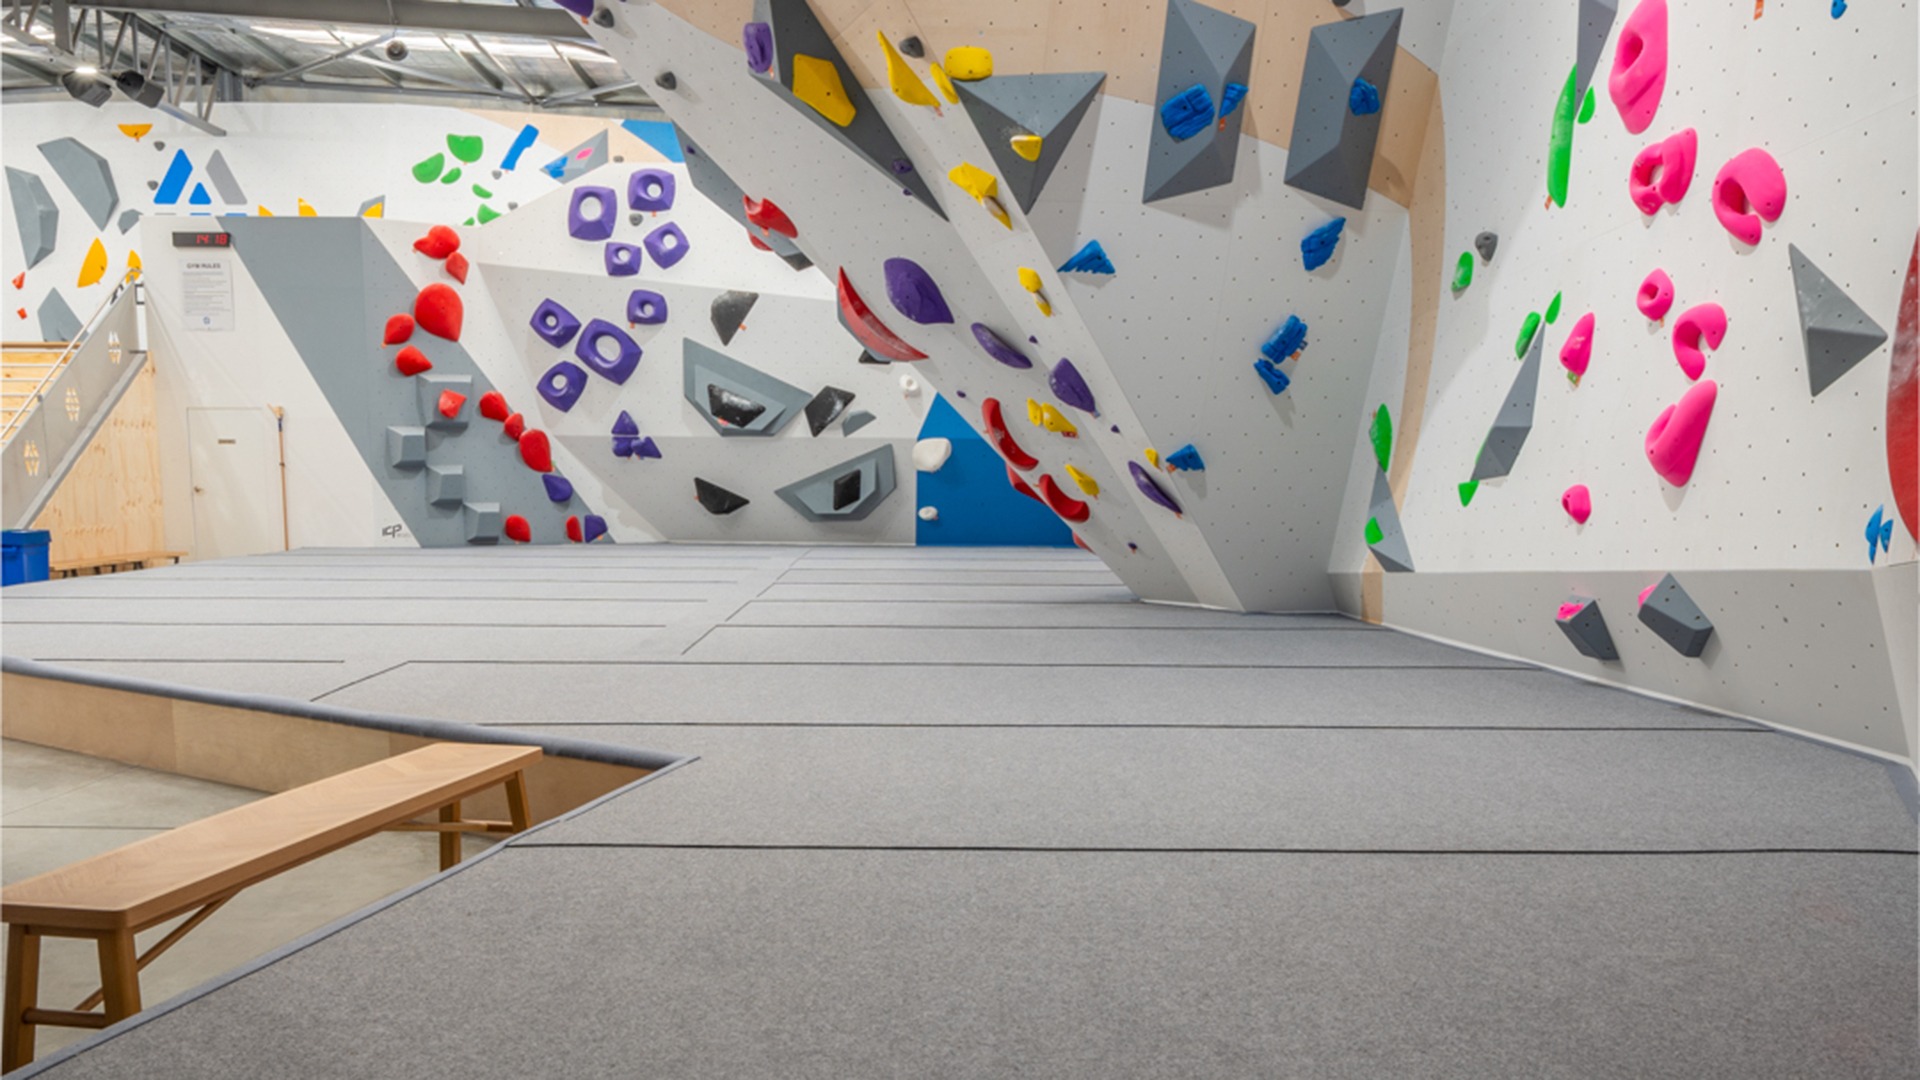 A bouldering gym with a colourful climbing wall and grey carpet climbing mats